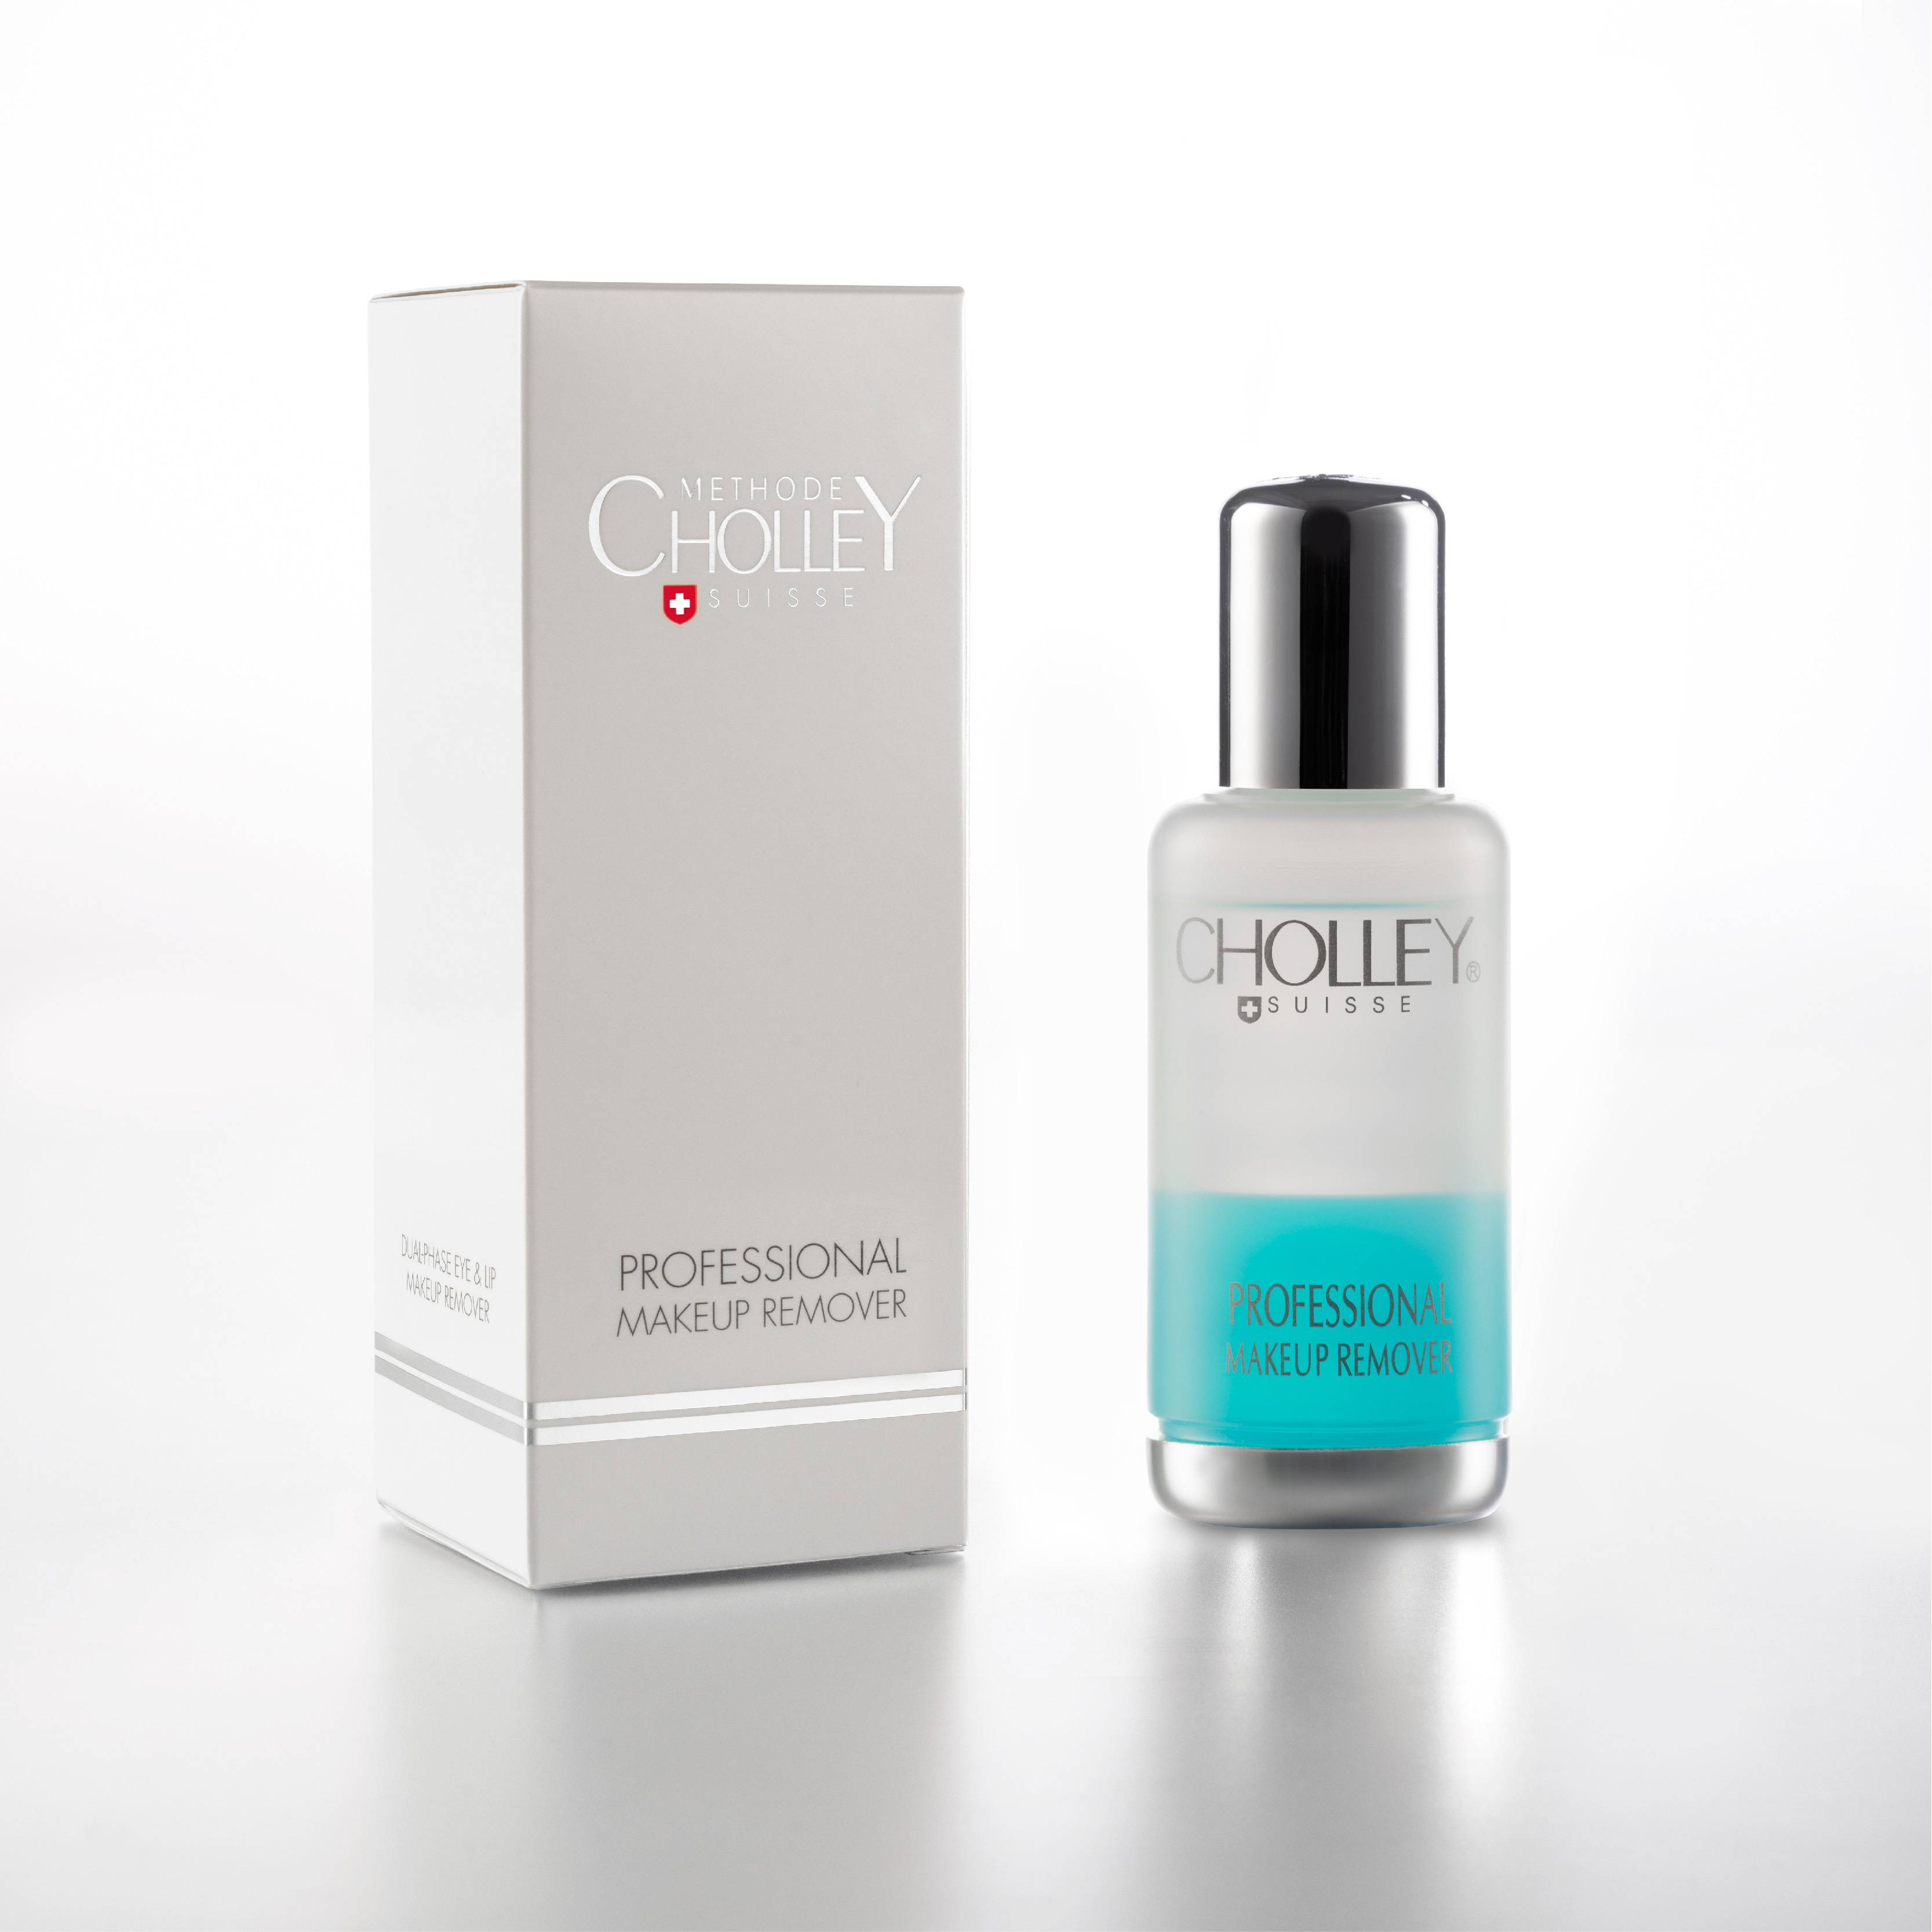 CHOLLEY Professional Makeup Remover